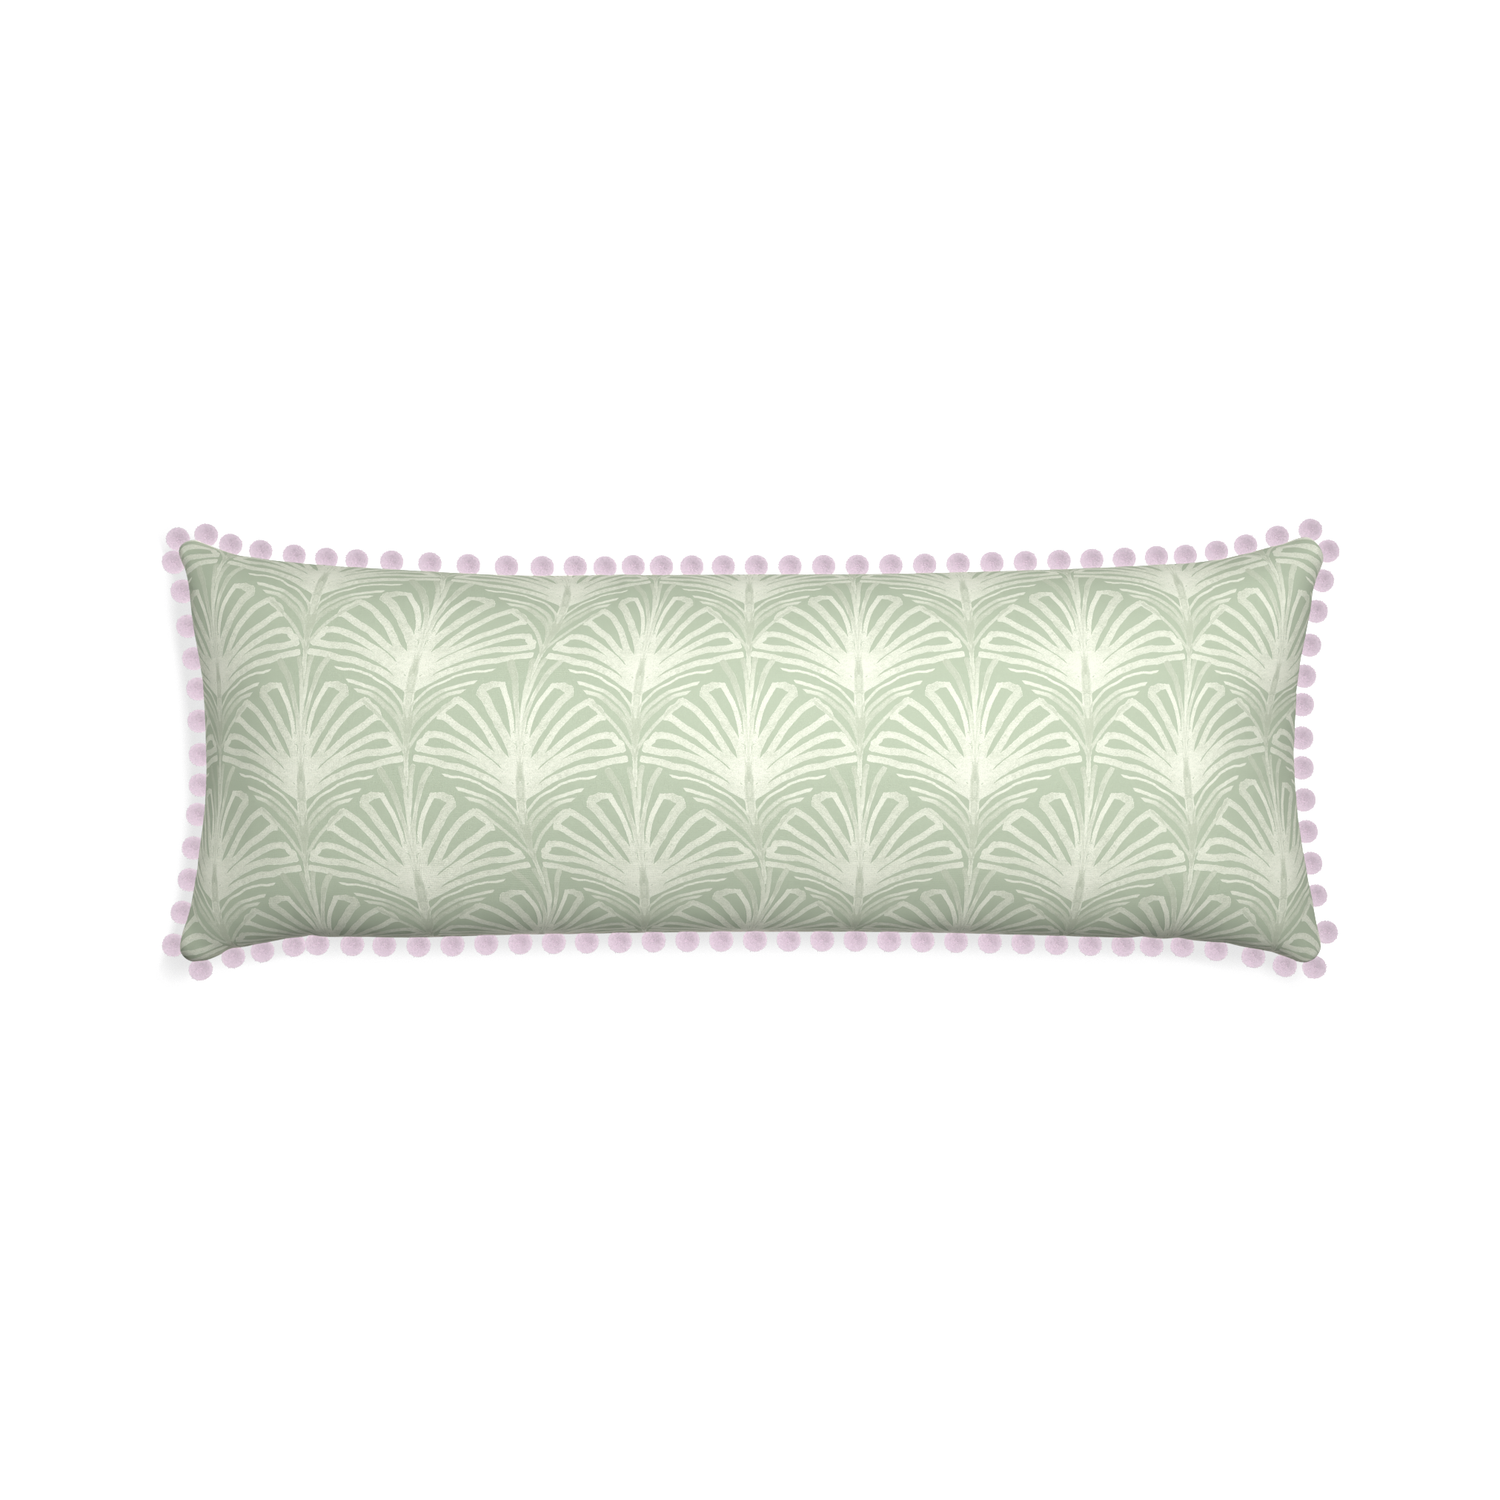 Xl-lumbar suzy sage custom sage green palmpillow with l on white background